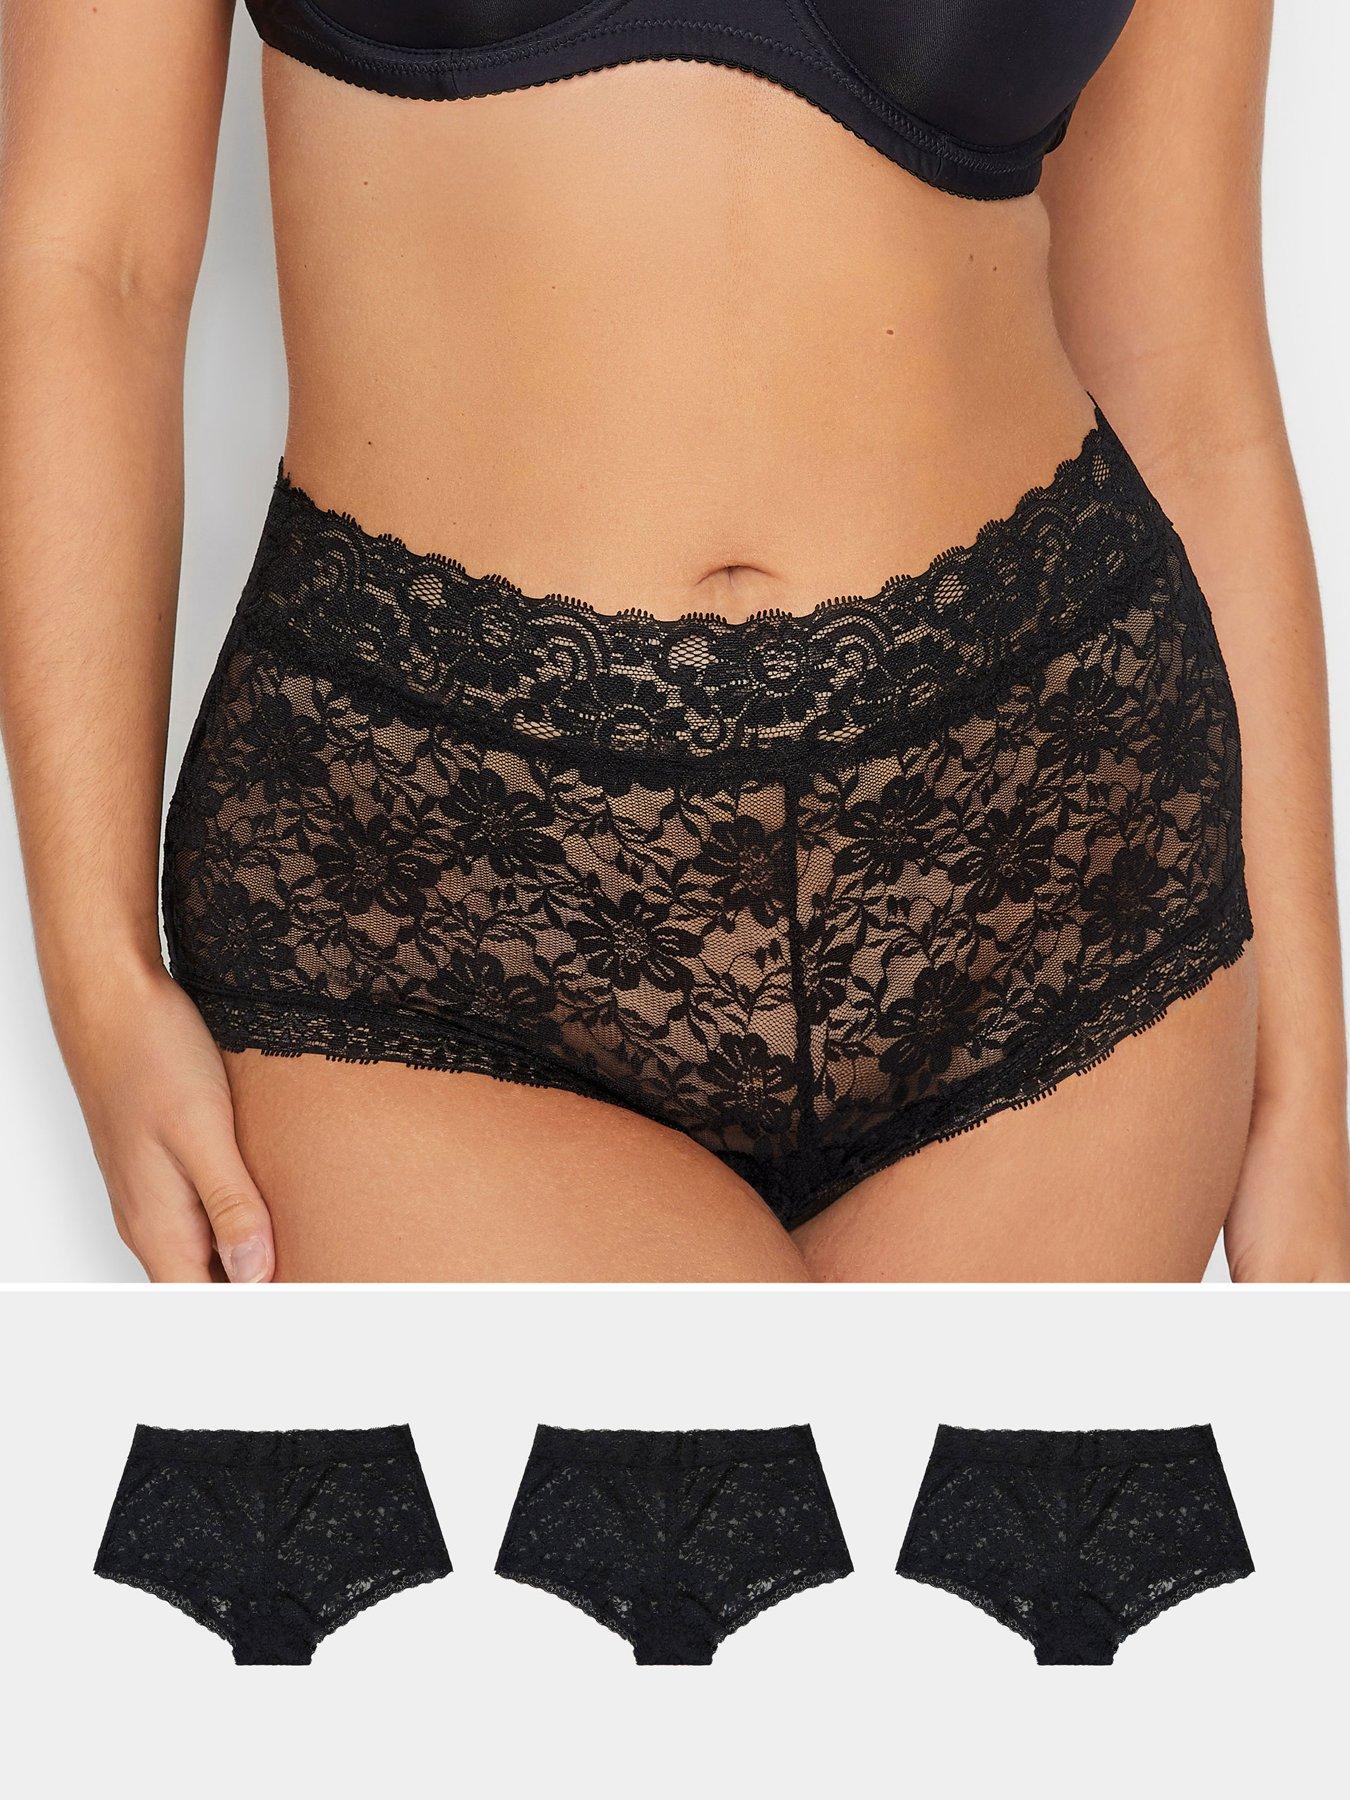 Seamless Briefs With Scalloped or Lace Waistband Detail - 3-Pack $22